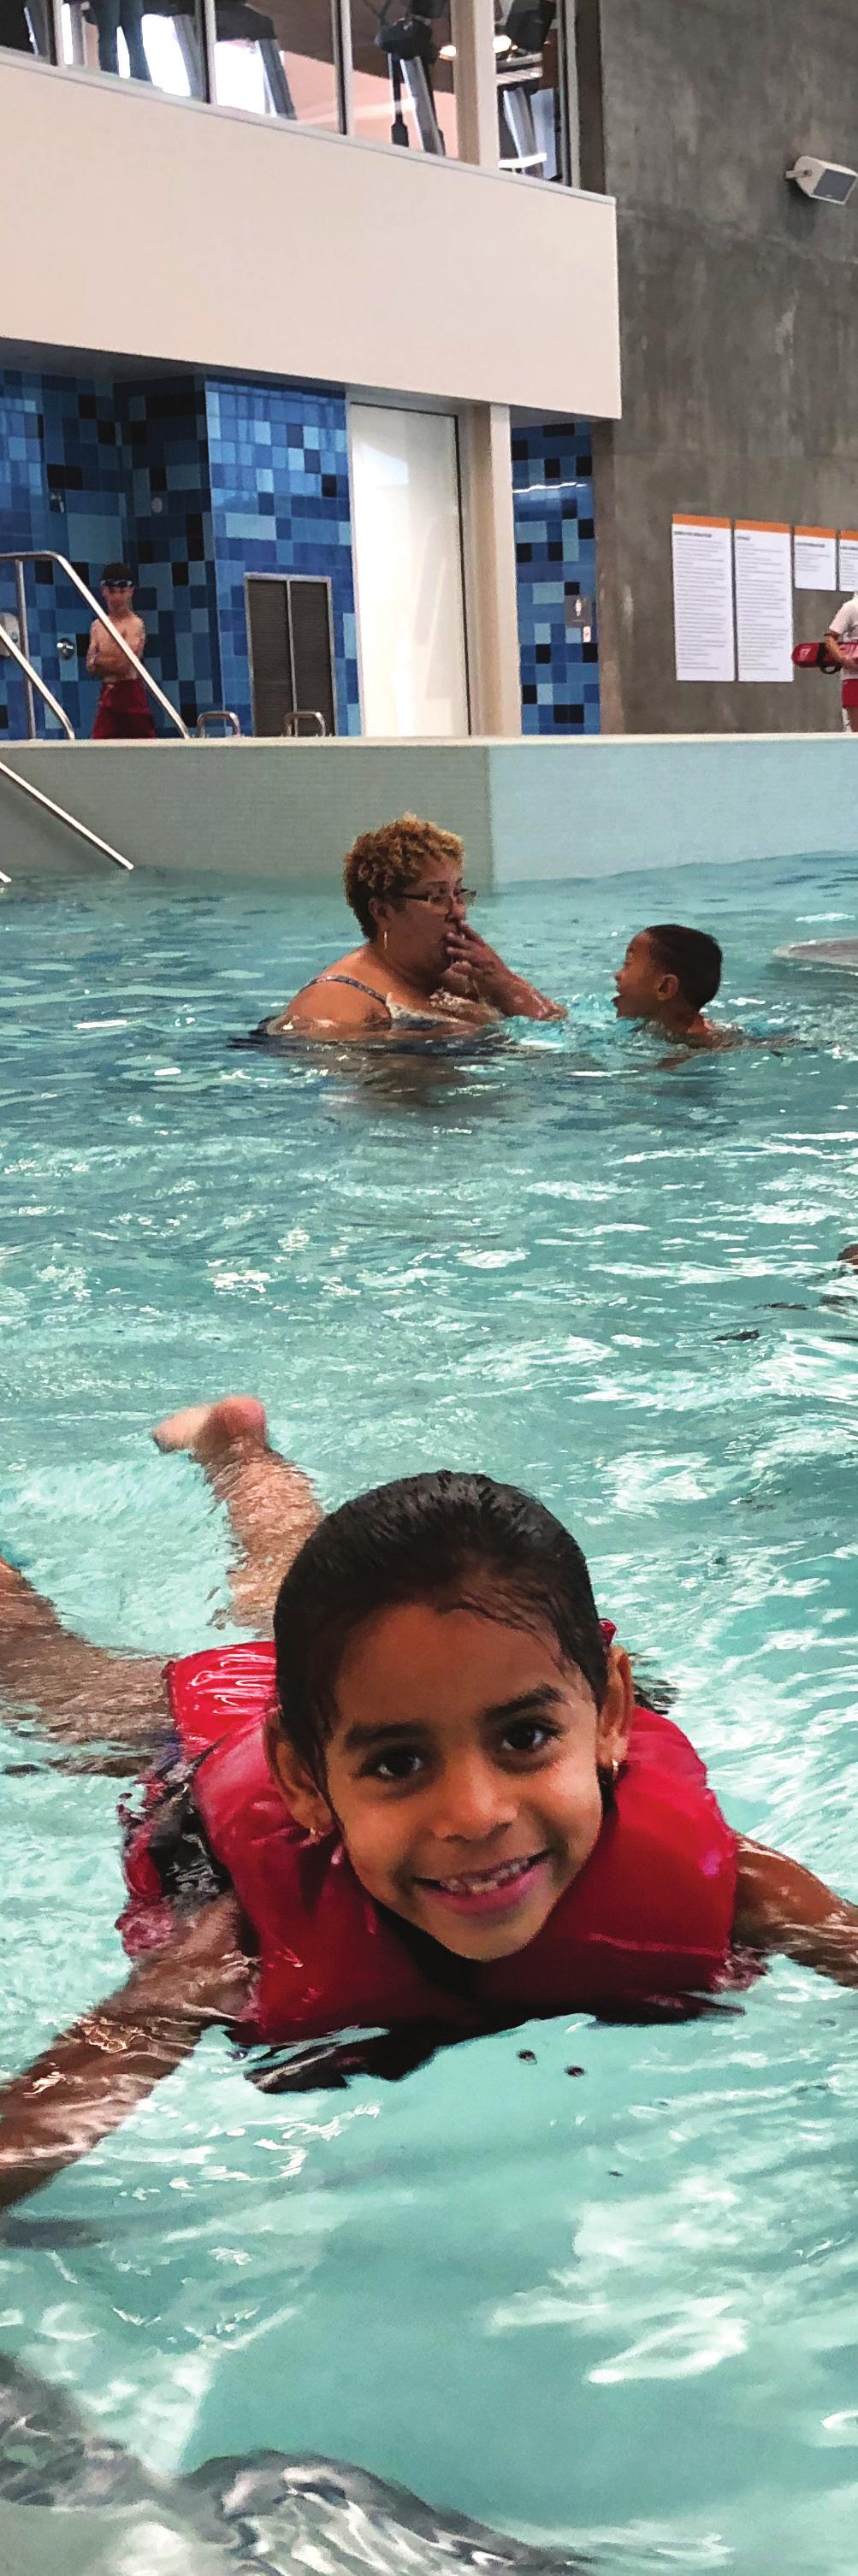 Voimsai.otrg/swimming rkstac MetroPa info! e r o m r fo DIVE IN! SWIM LESSONS and more with Metro Parks Tacoma Swim Lessons General info for all pools, call: (253) 404-3991.